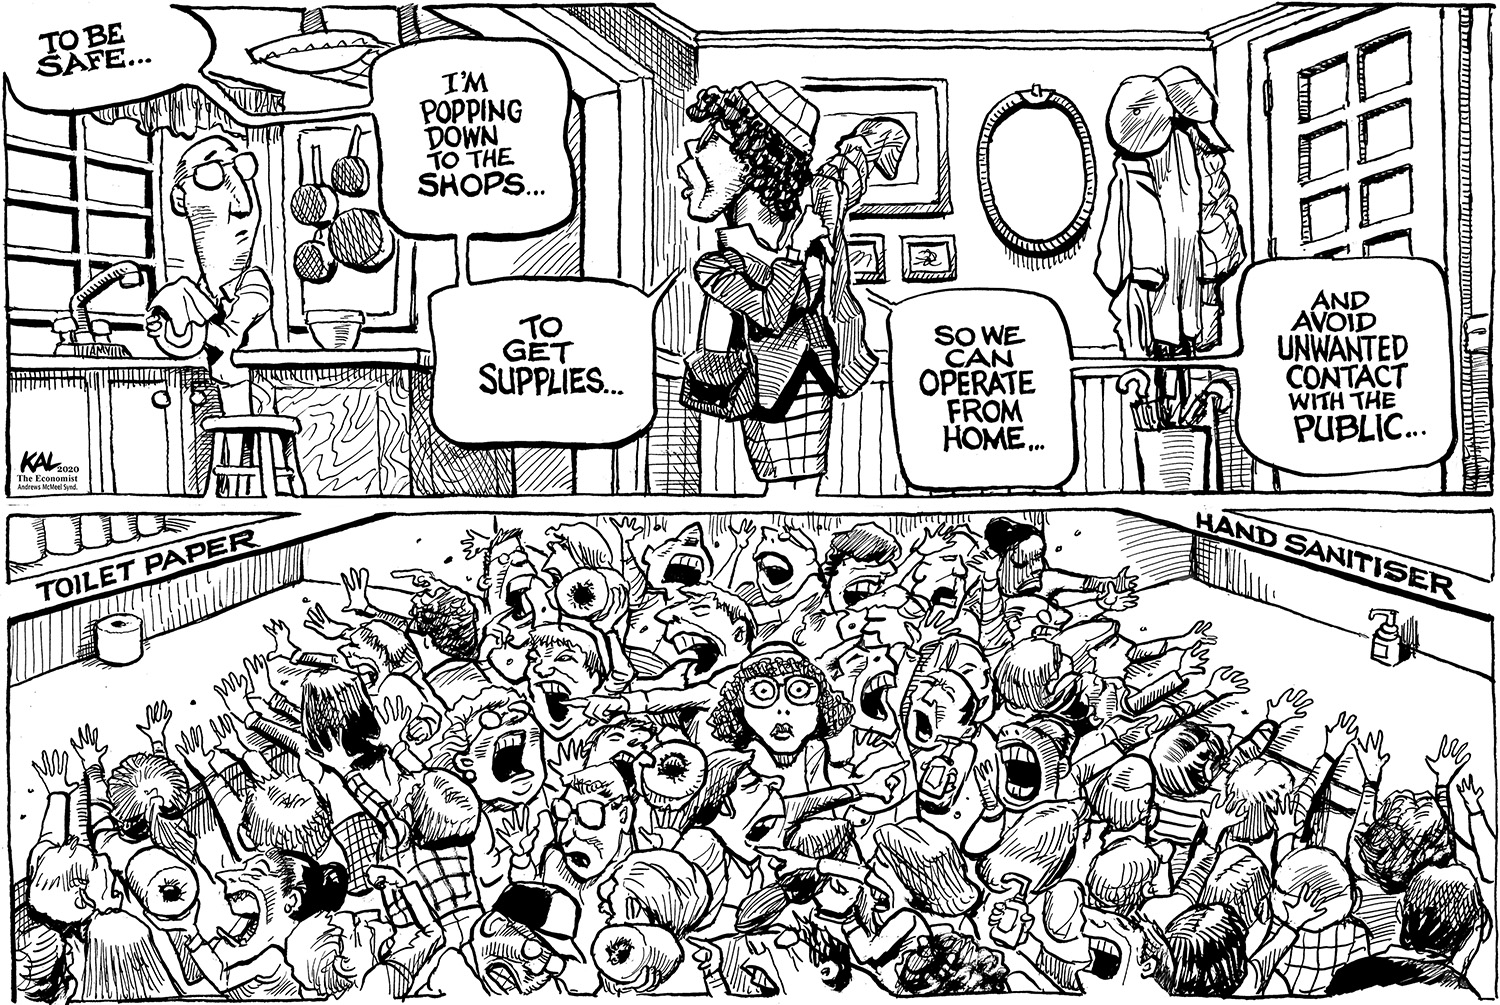 Kal cartoon pandemic shopping from The Economist